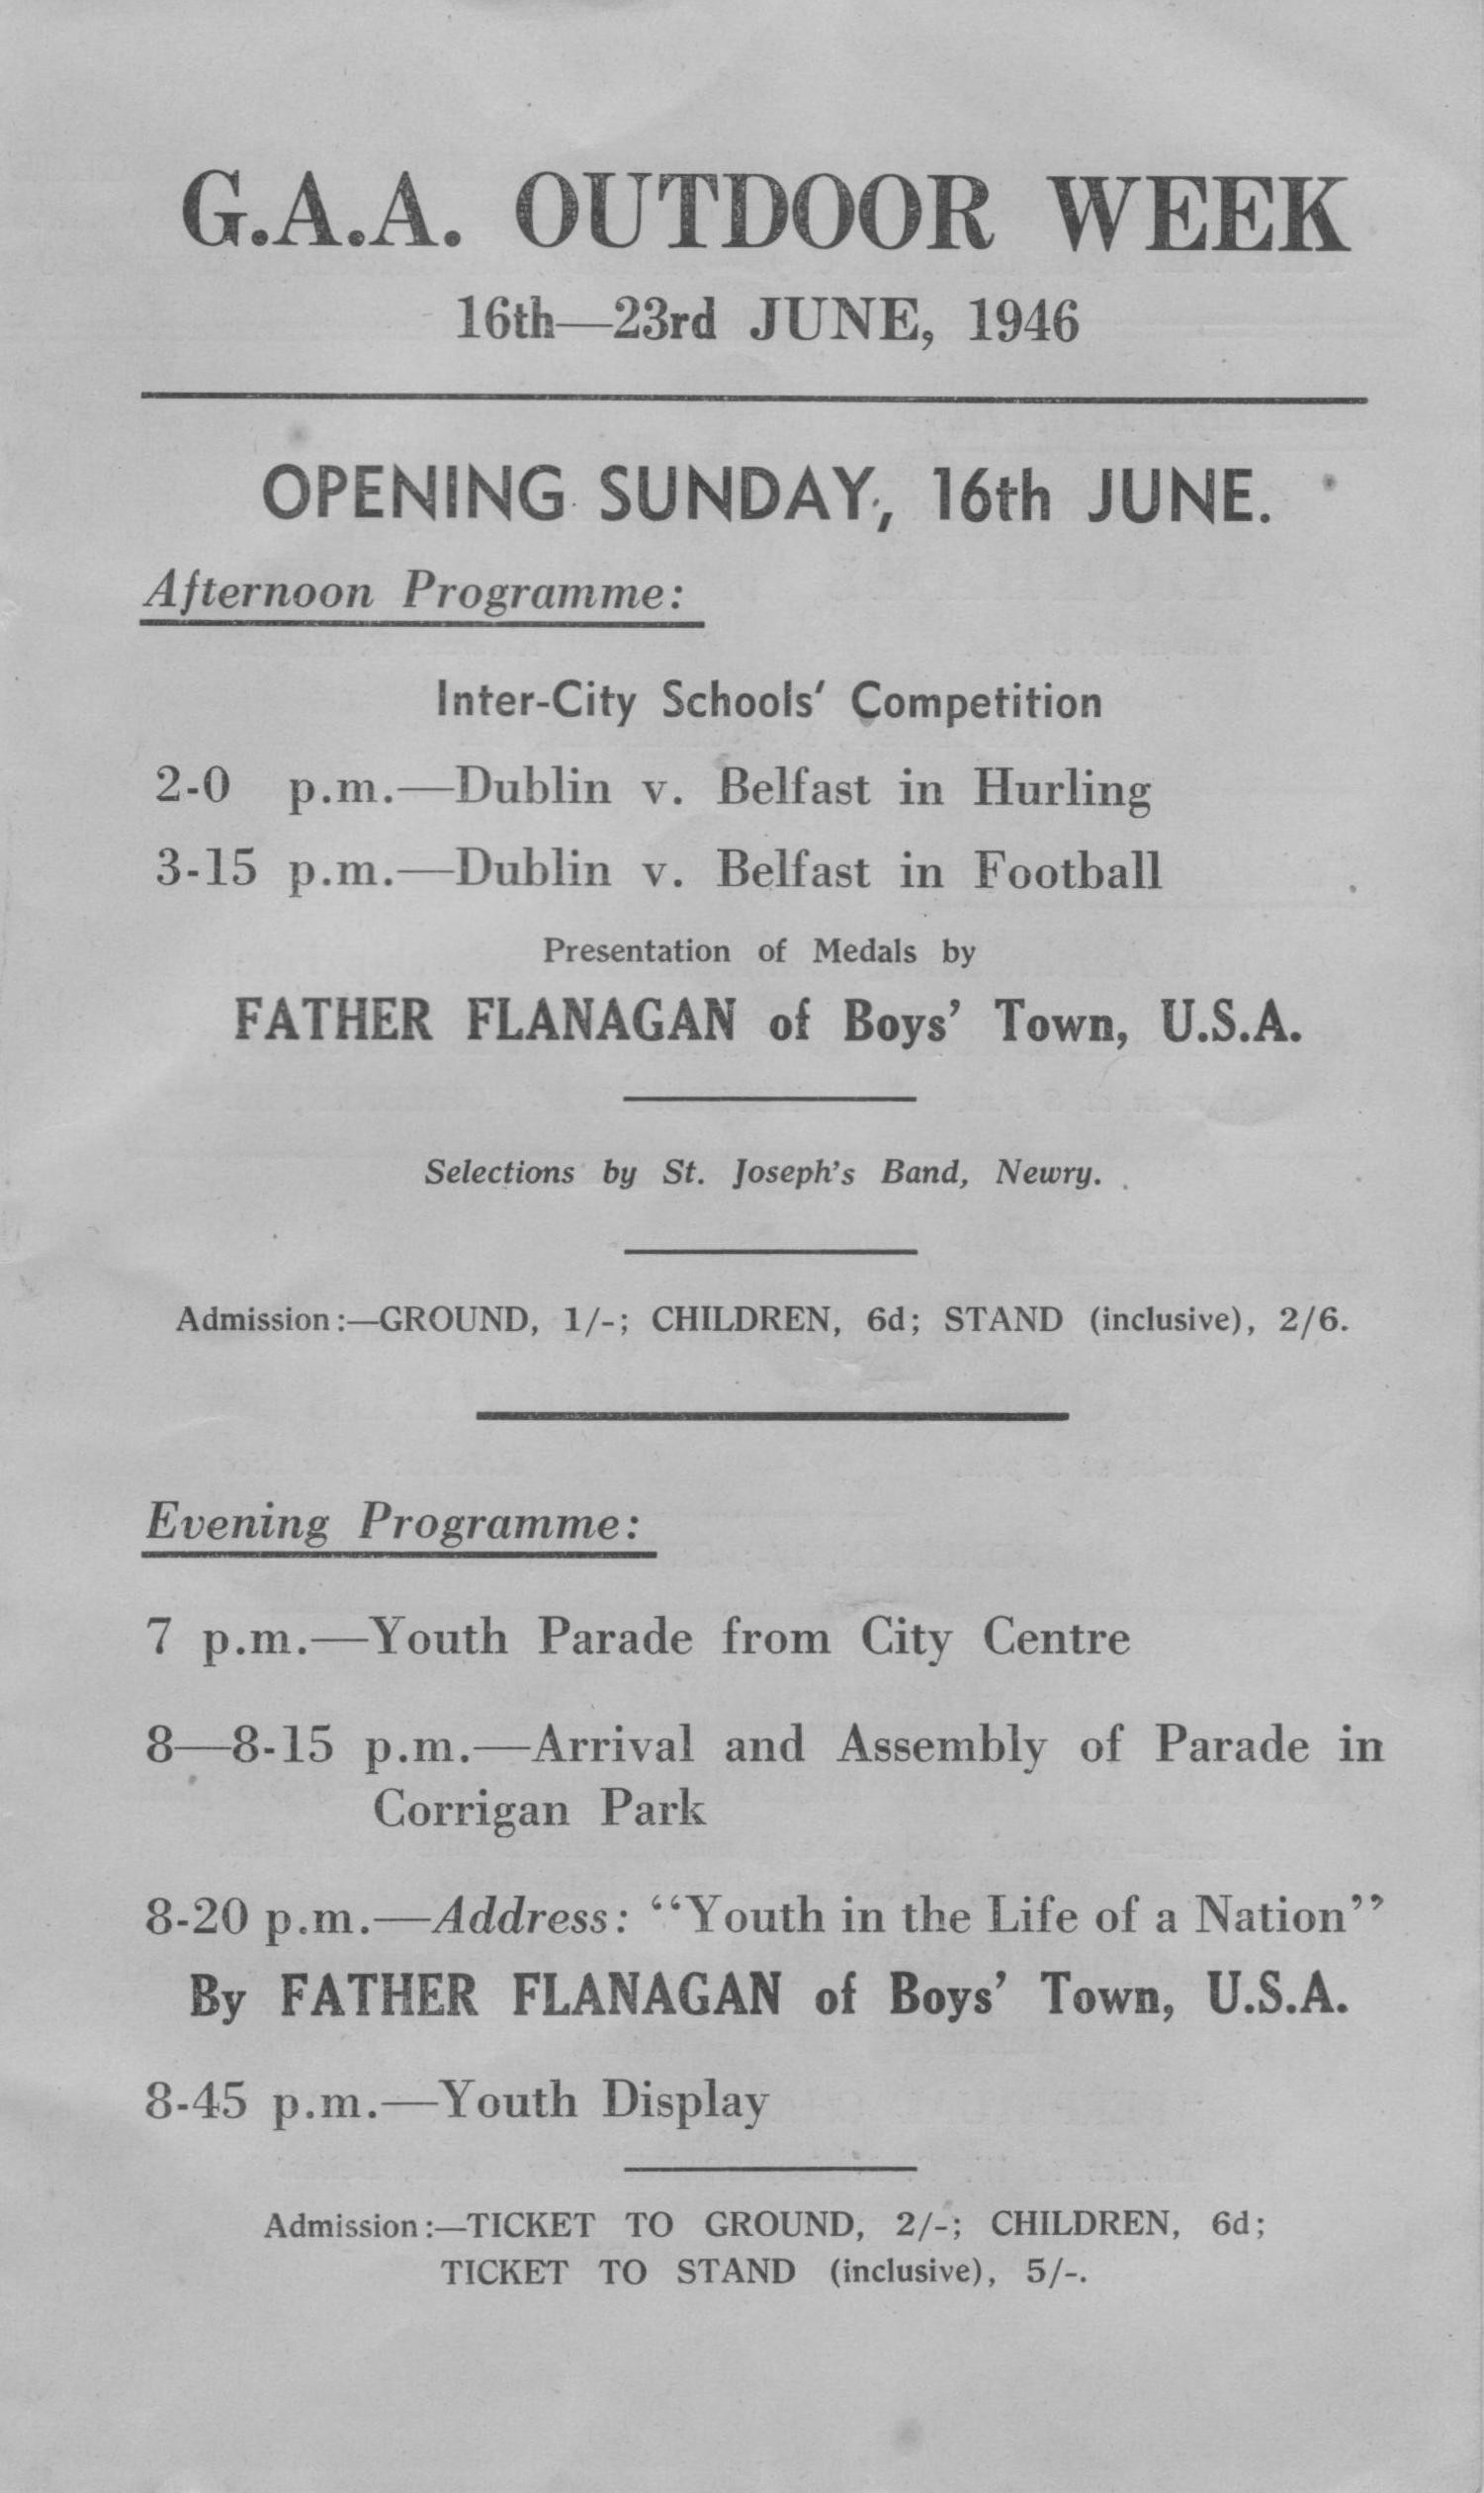 Fr Edward Flanagan is guest of honour at the GAA Outdoor Week, held at Corrigan Park, Belfast, in 1946. Flanagan was an Irish-born priest who had emigrated to the United States and, in 1917, founded ‘Boys Town’, a special home for destitute children. In the course of this visit to Ireland, Flanagan, an acknowl­edged expert in the field of childcare, criticised the treatment of Irish children in religious-run industrial and reformatory schools.